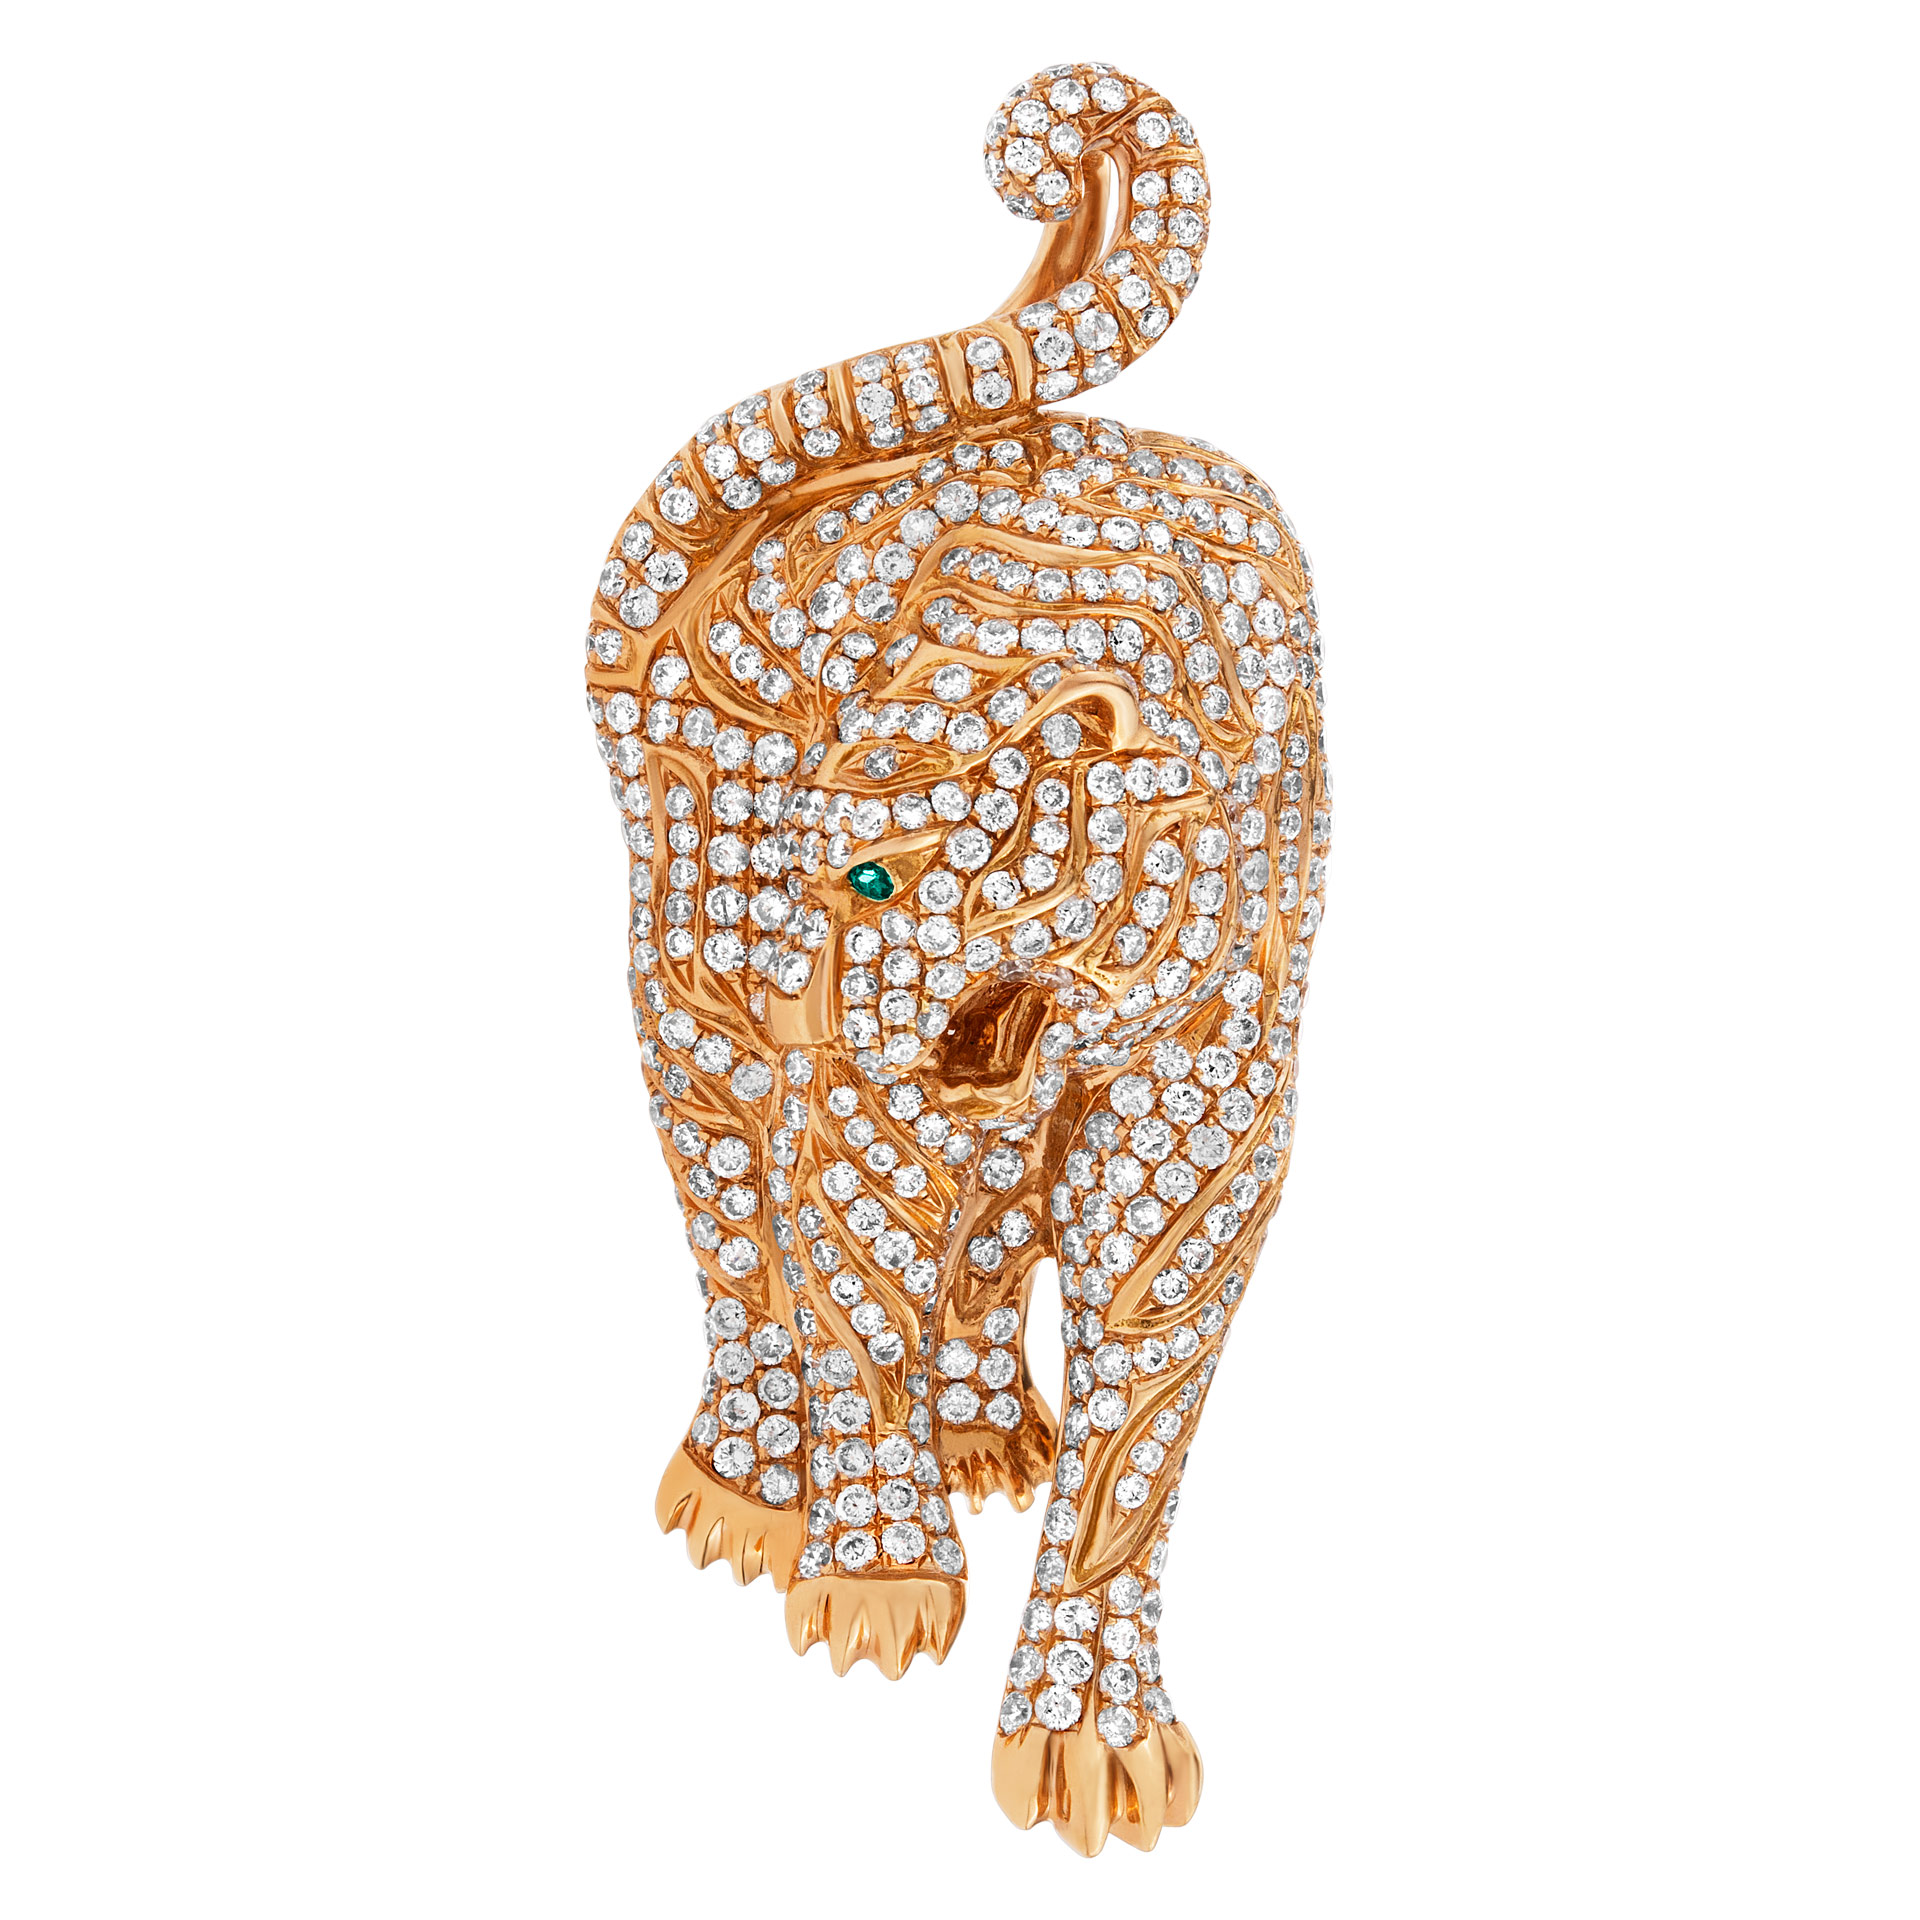 Opulent Tiger pendant in 18K rose gold and diamonds. 4.98 carats in diamonds image 1